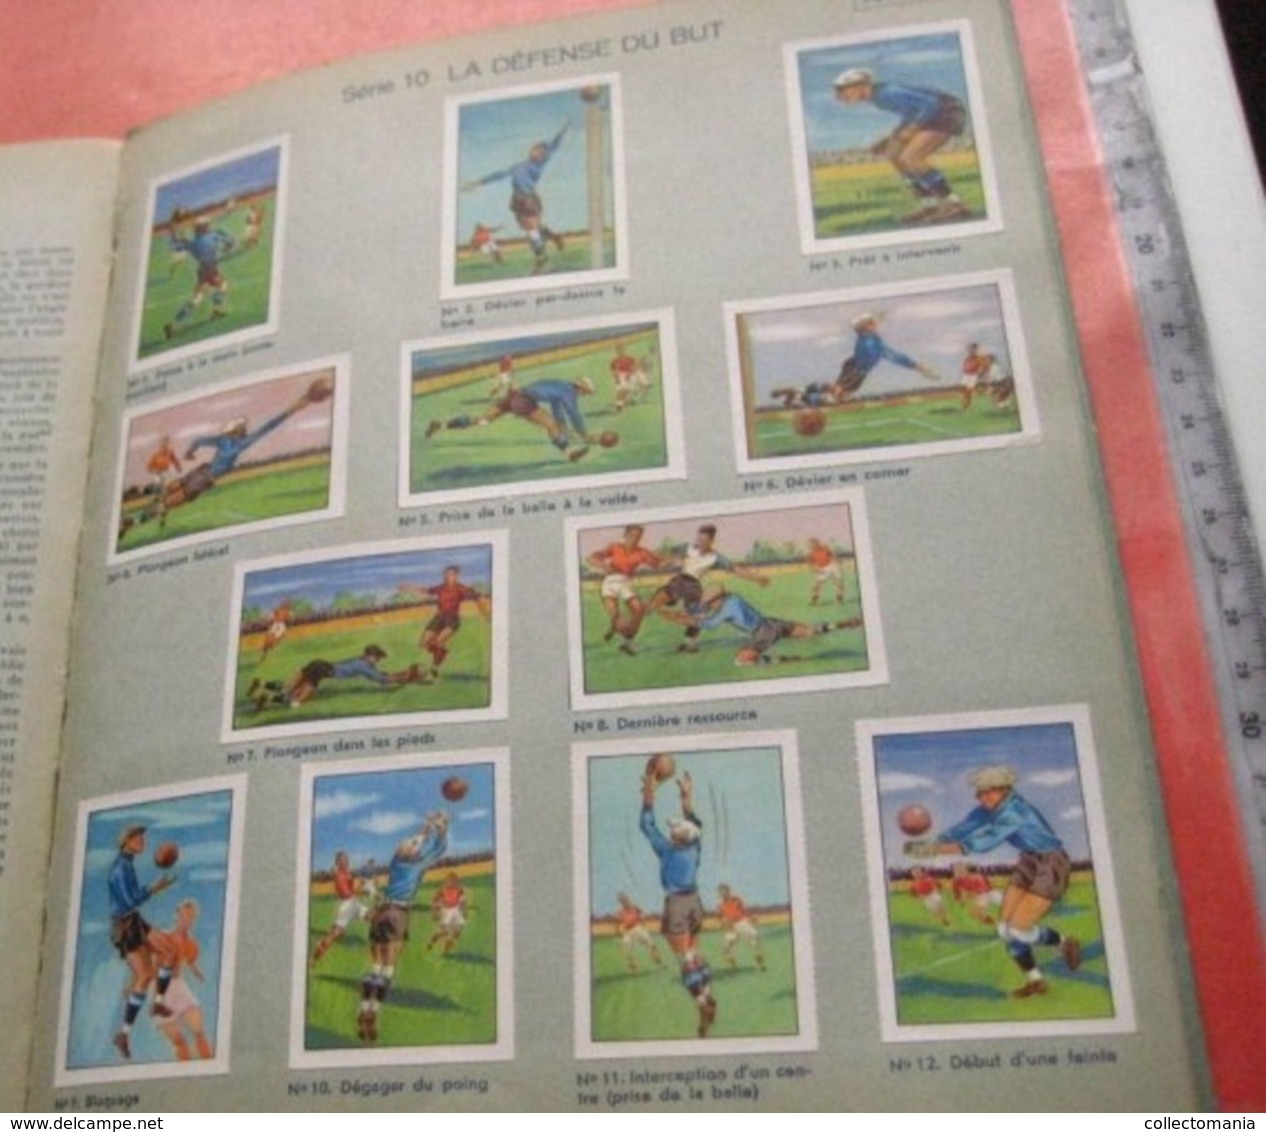 ice hockey, football, tennis, bicycling, ski, rowing, athletic; ALBUM  with glued vignette complete sets olympic games